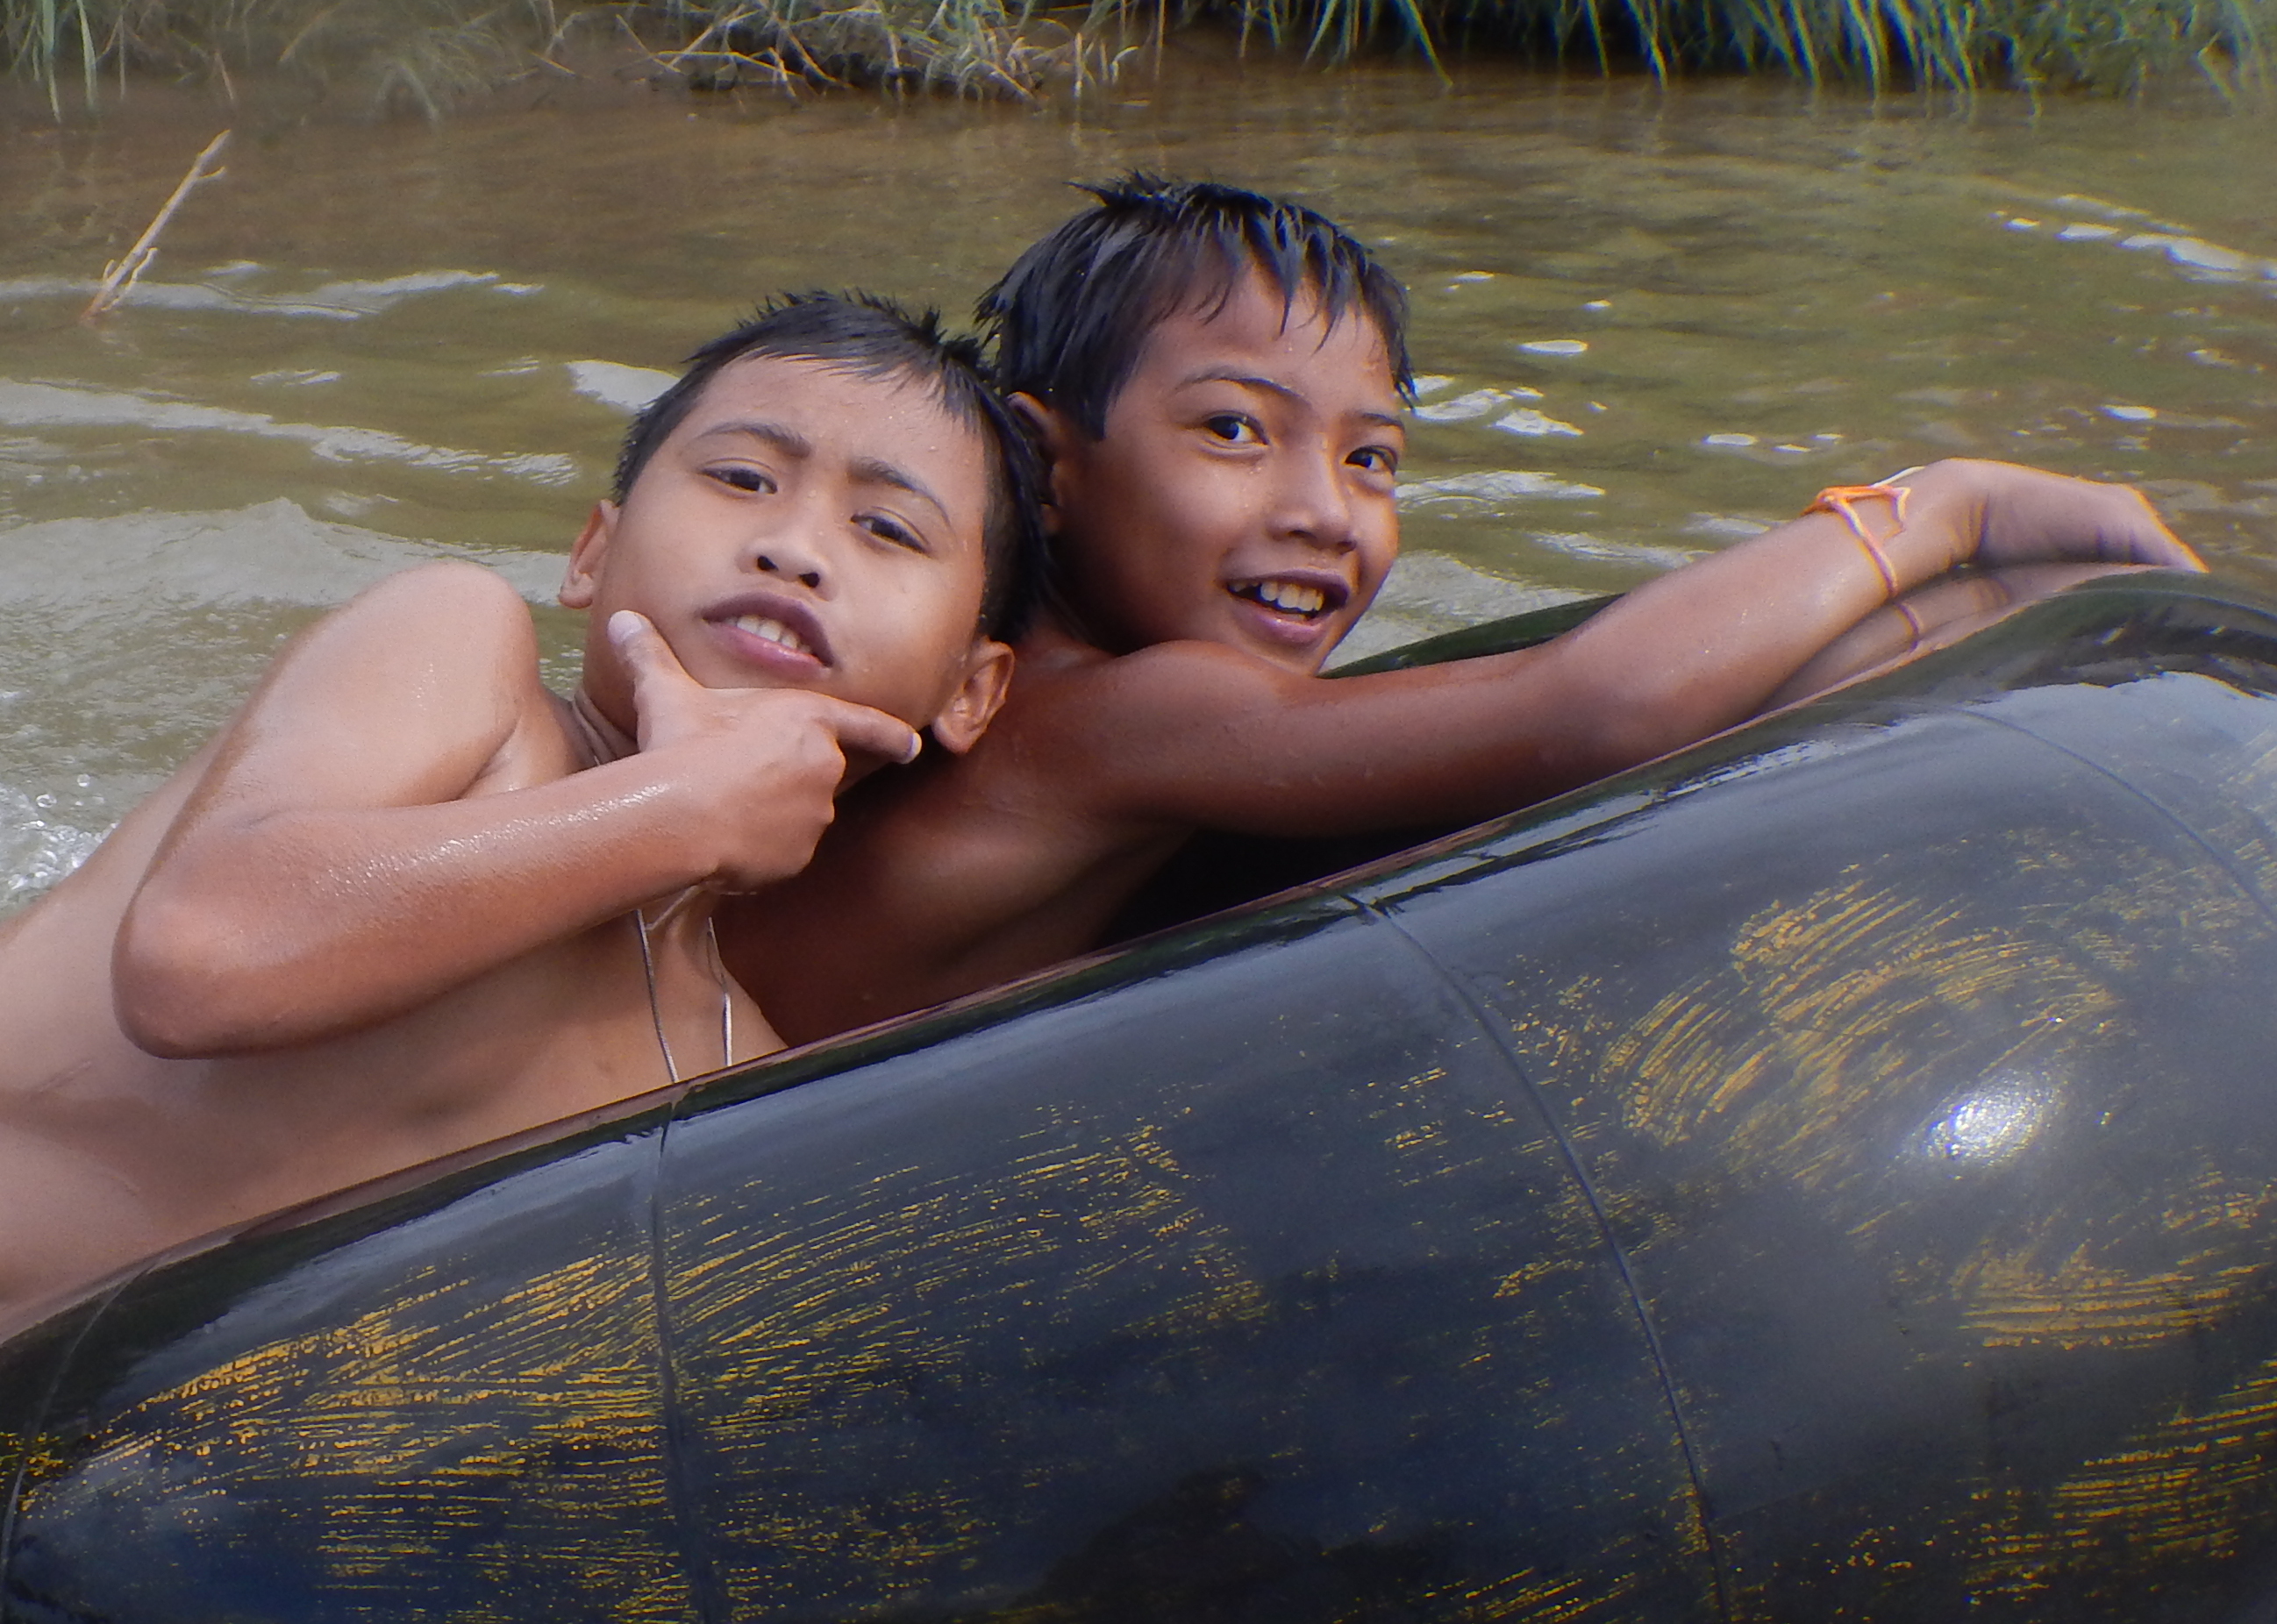 Local boys, floating the Nam Song River in Vang Vieng, Laos